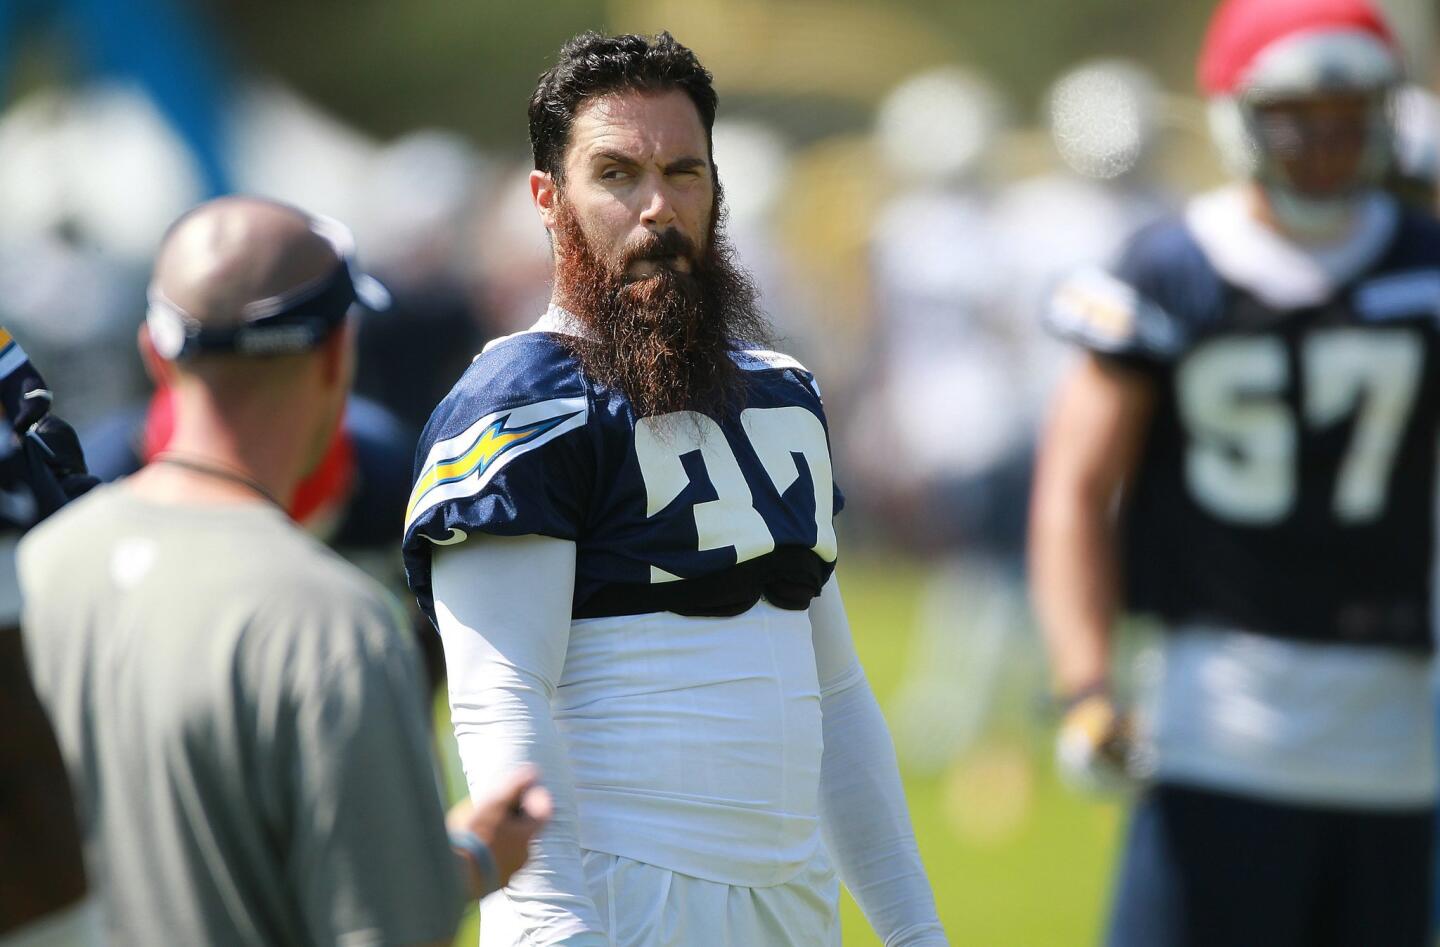 Chargers safety Eric Weddle had a light moment out on the field at Chargers Park on the first day of camp.